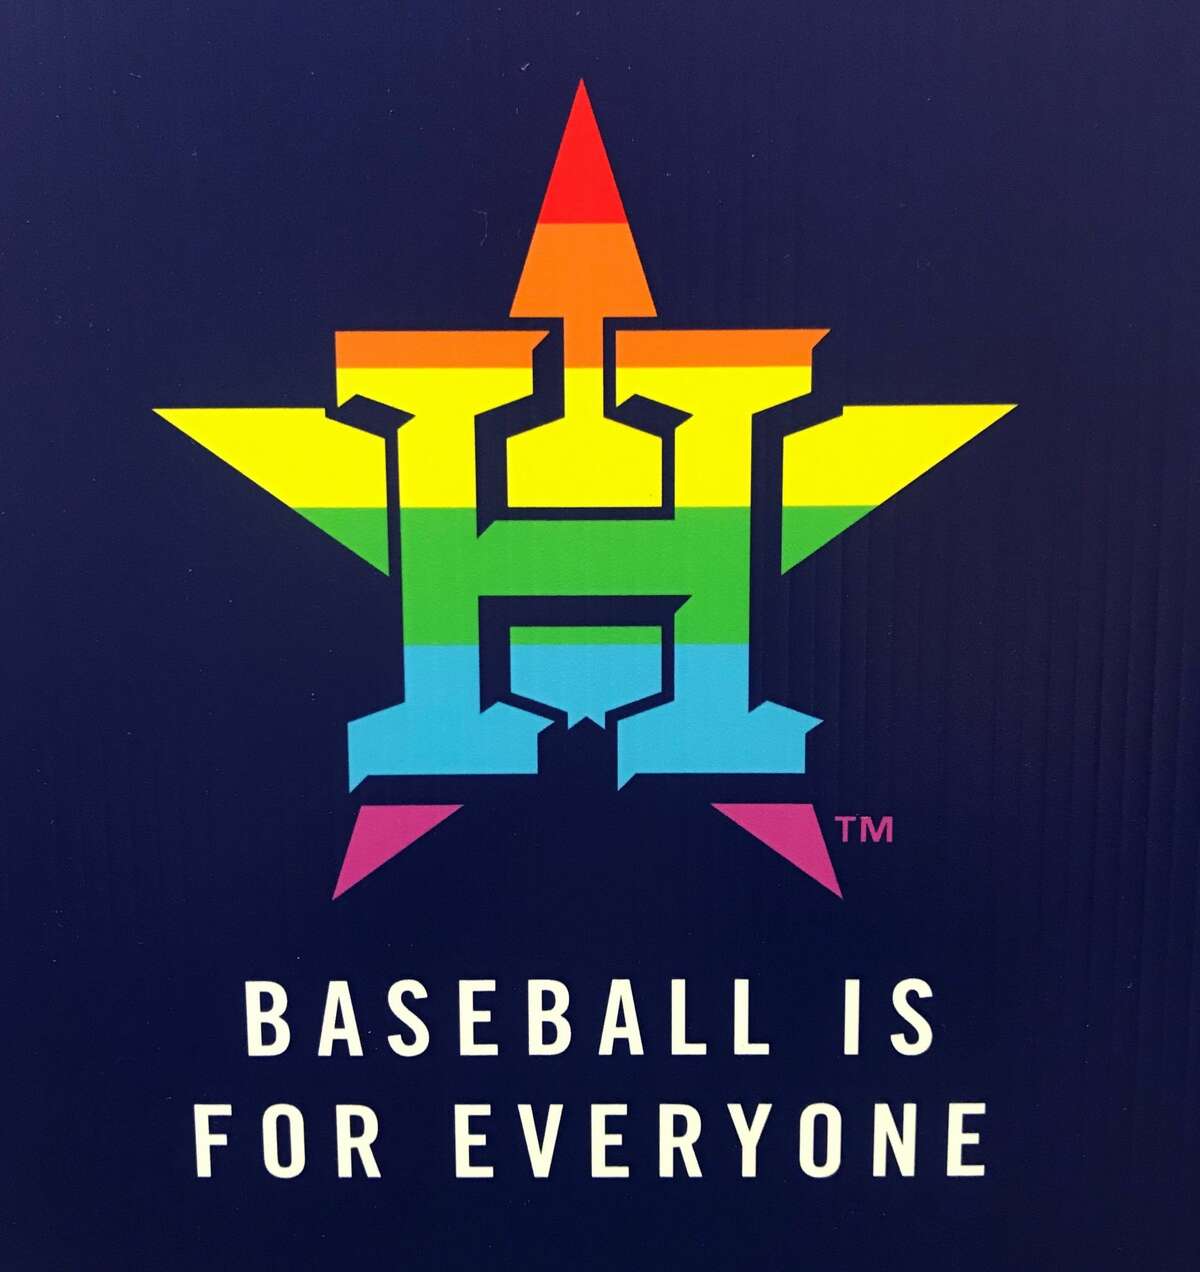 PHOTOS: A sampling of some of the Astros giveaways for fans in the 2020 season The Houston Astros will celebrate Pride Night on June 24 against the Minnesota Twins at Minute Maid Park.